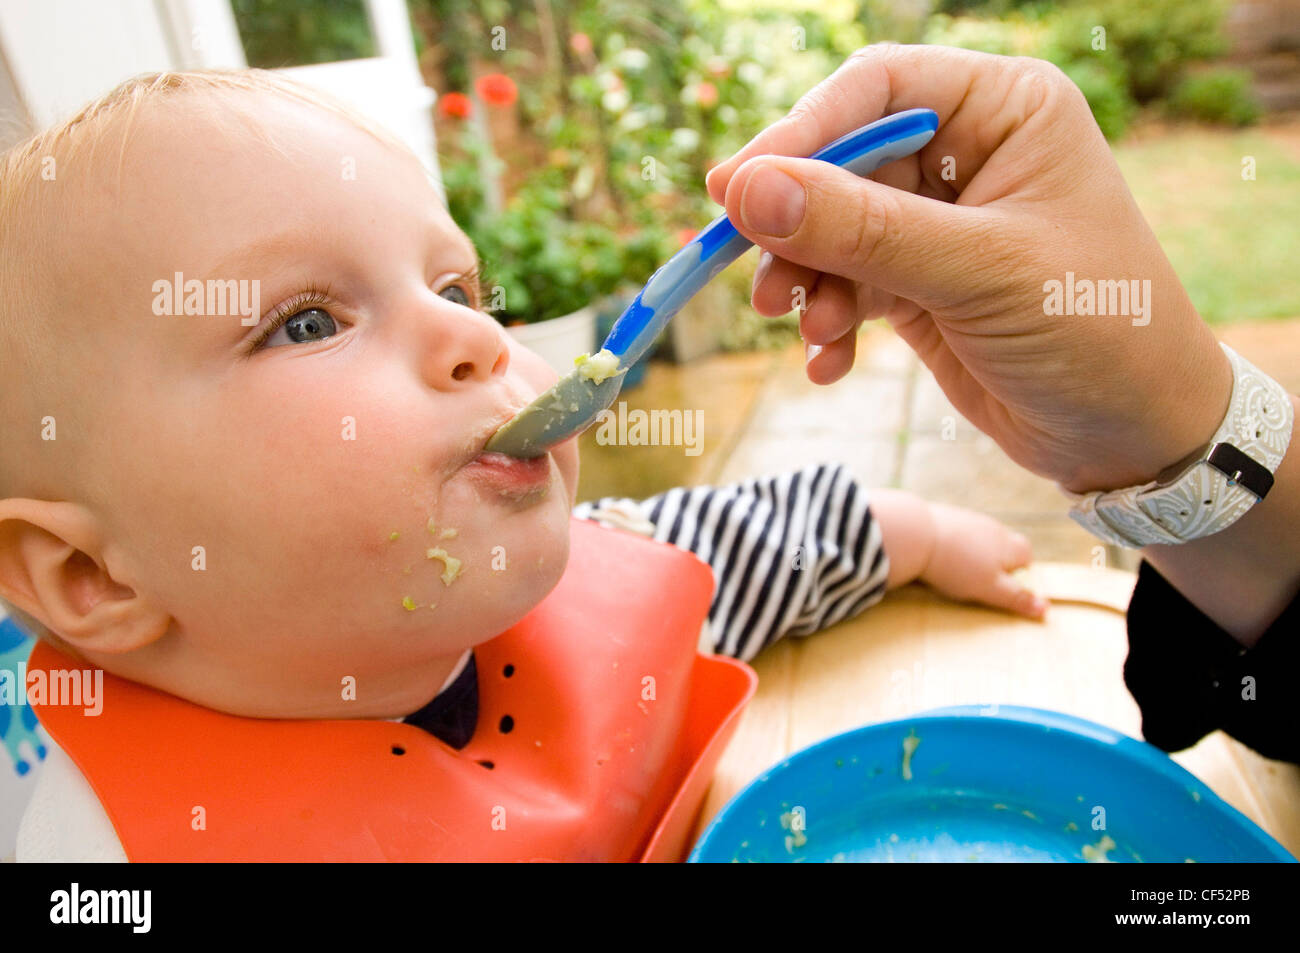 Blonde male child aged months wearing a black and white stripey top and an orange bib being fed baby food a blue plastic spoon Stock Photo